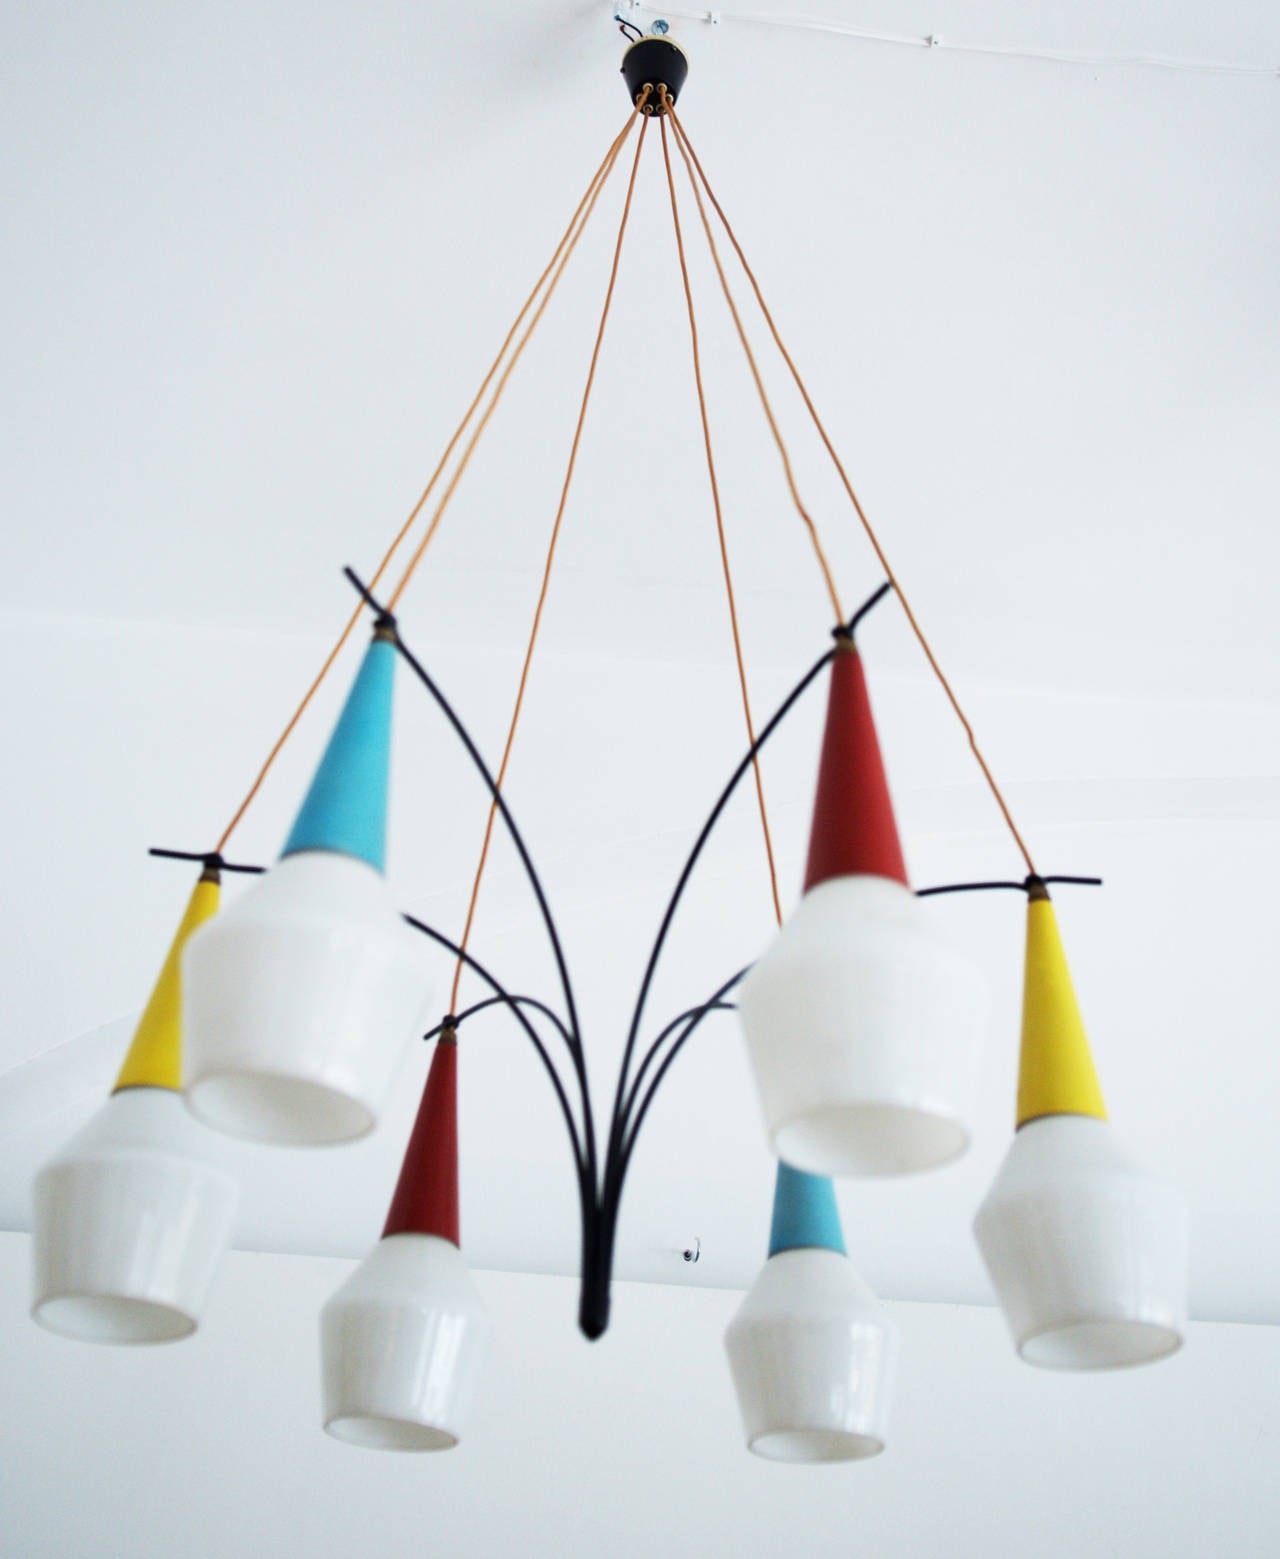 Mid-Century Modern Chandelier by Rupert Nikoll from Ealy 1950s For Sale